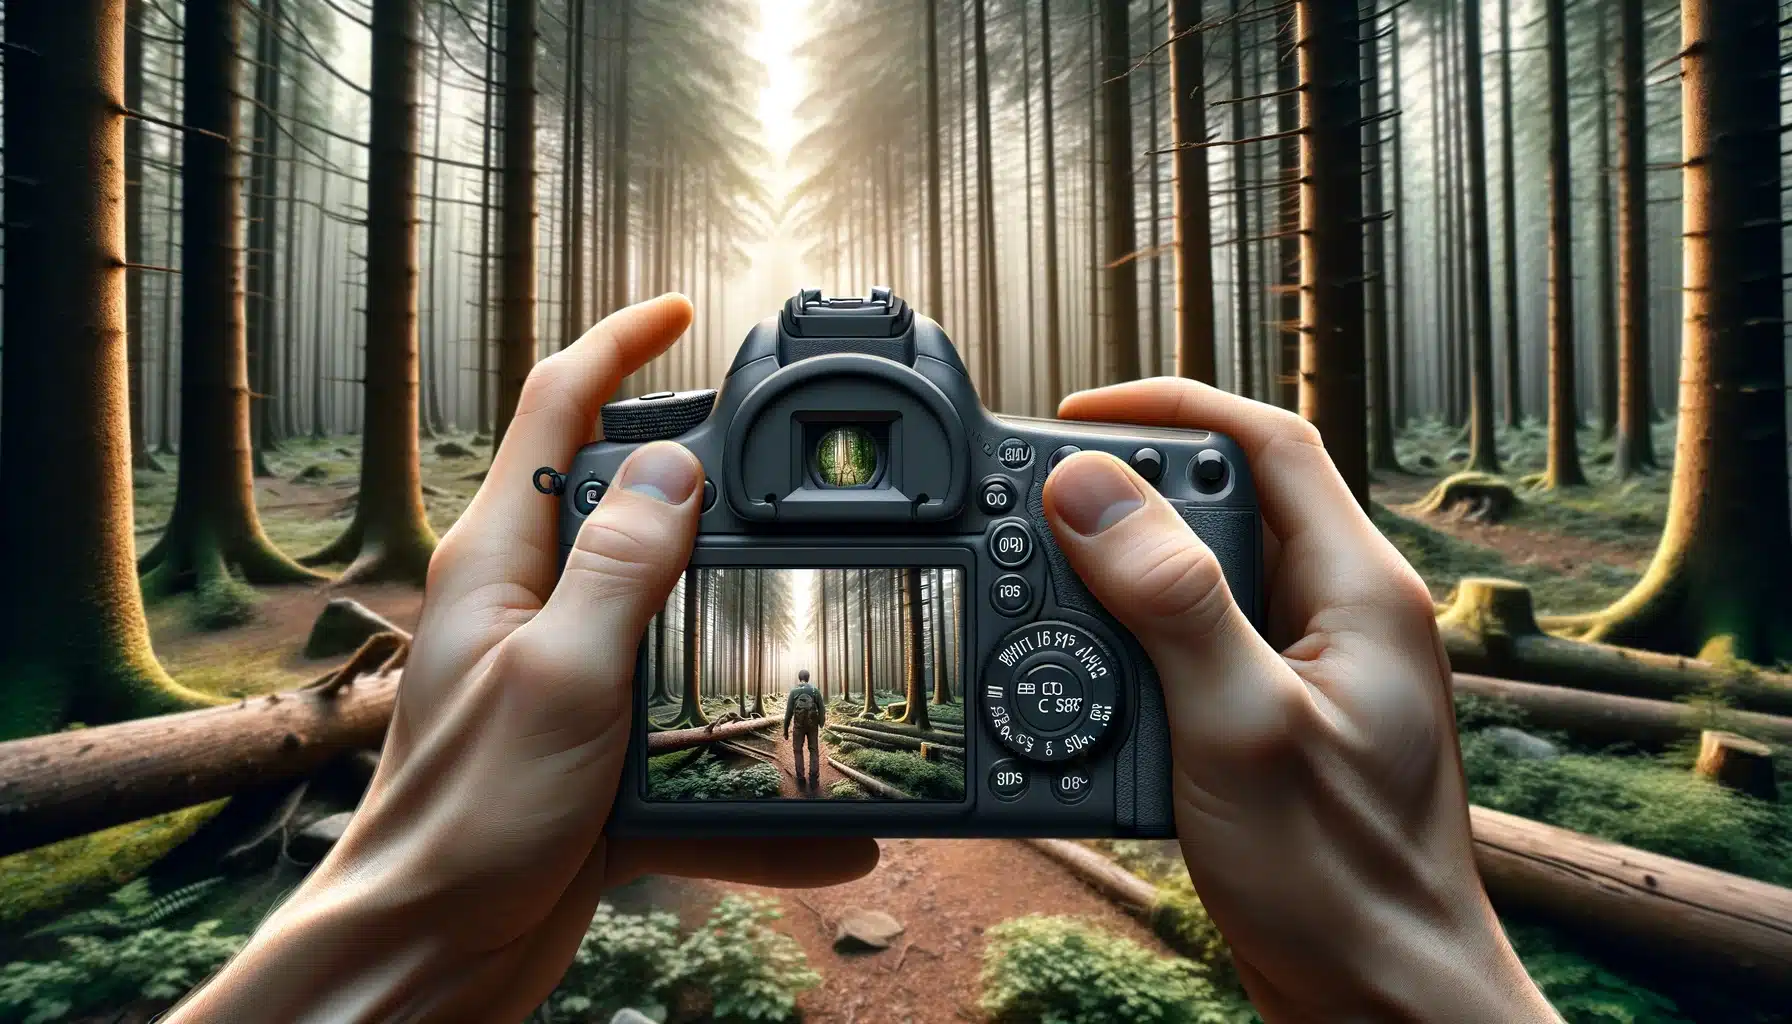 Photographer in a forest using Orifice Precedence Way, capturing detailed scenes with a depth of field effect to isolate subjects.